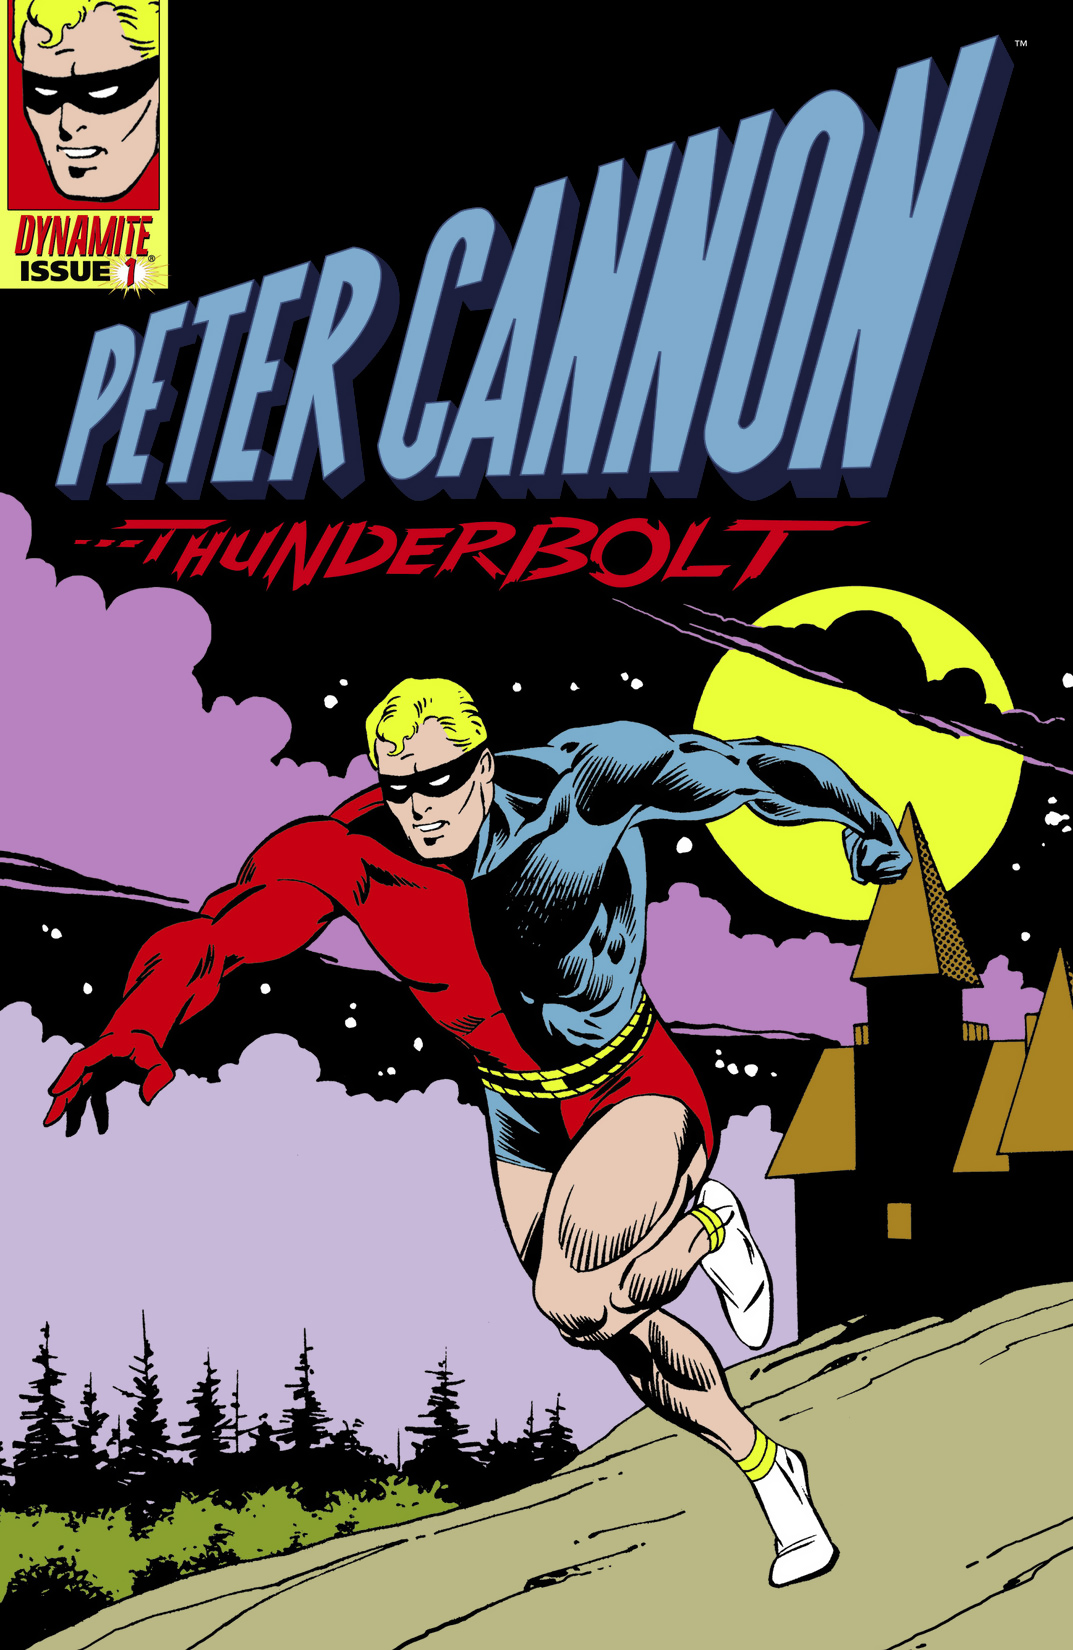 Peter Cannon: Thunderbolt (2012) Issue #1 #1 - English 5